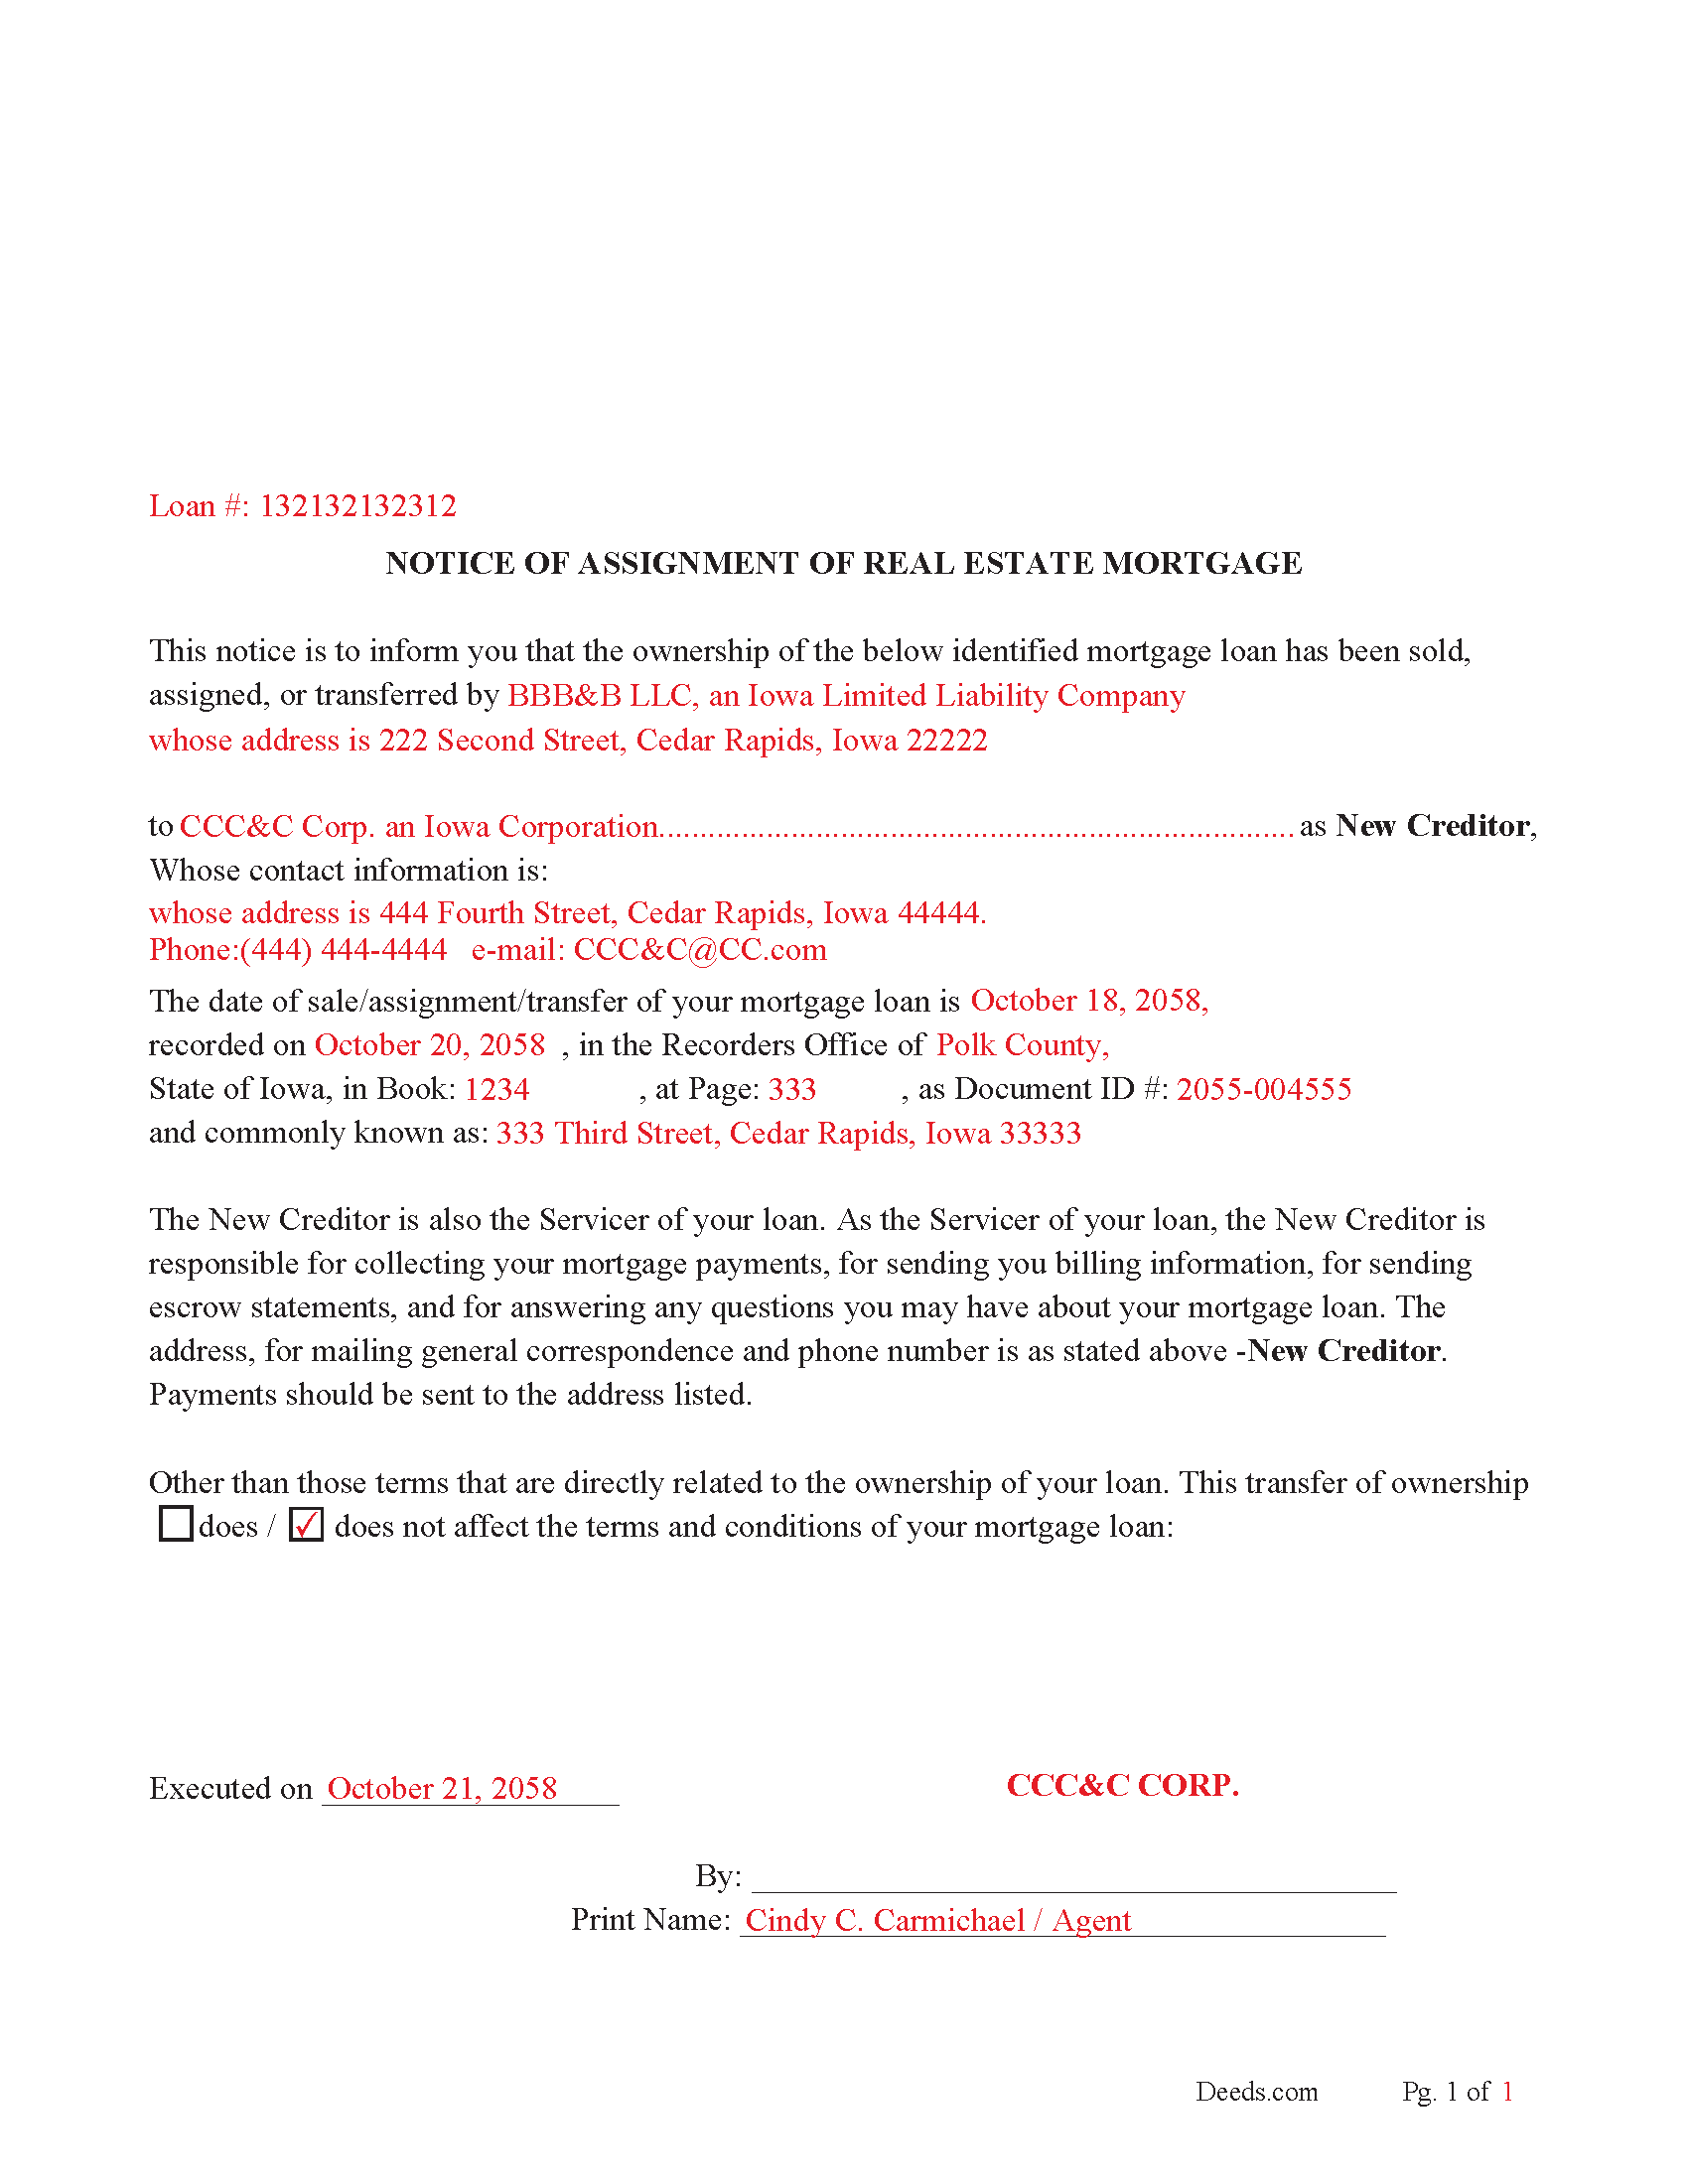 Notice of Assignment of Real Estate Mortgage-Completed Example